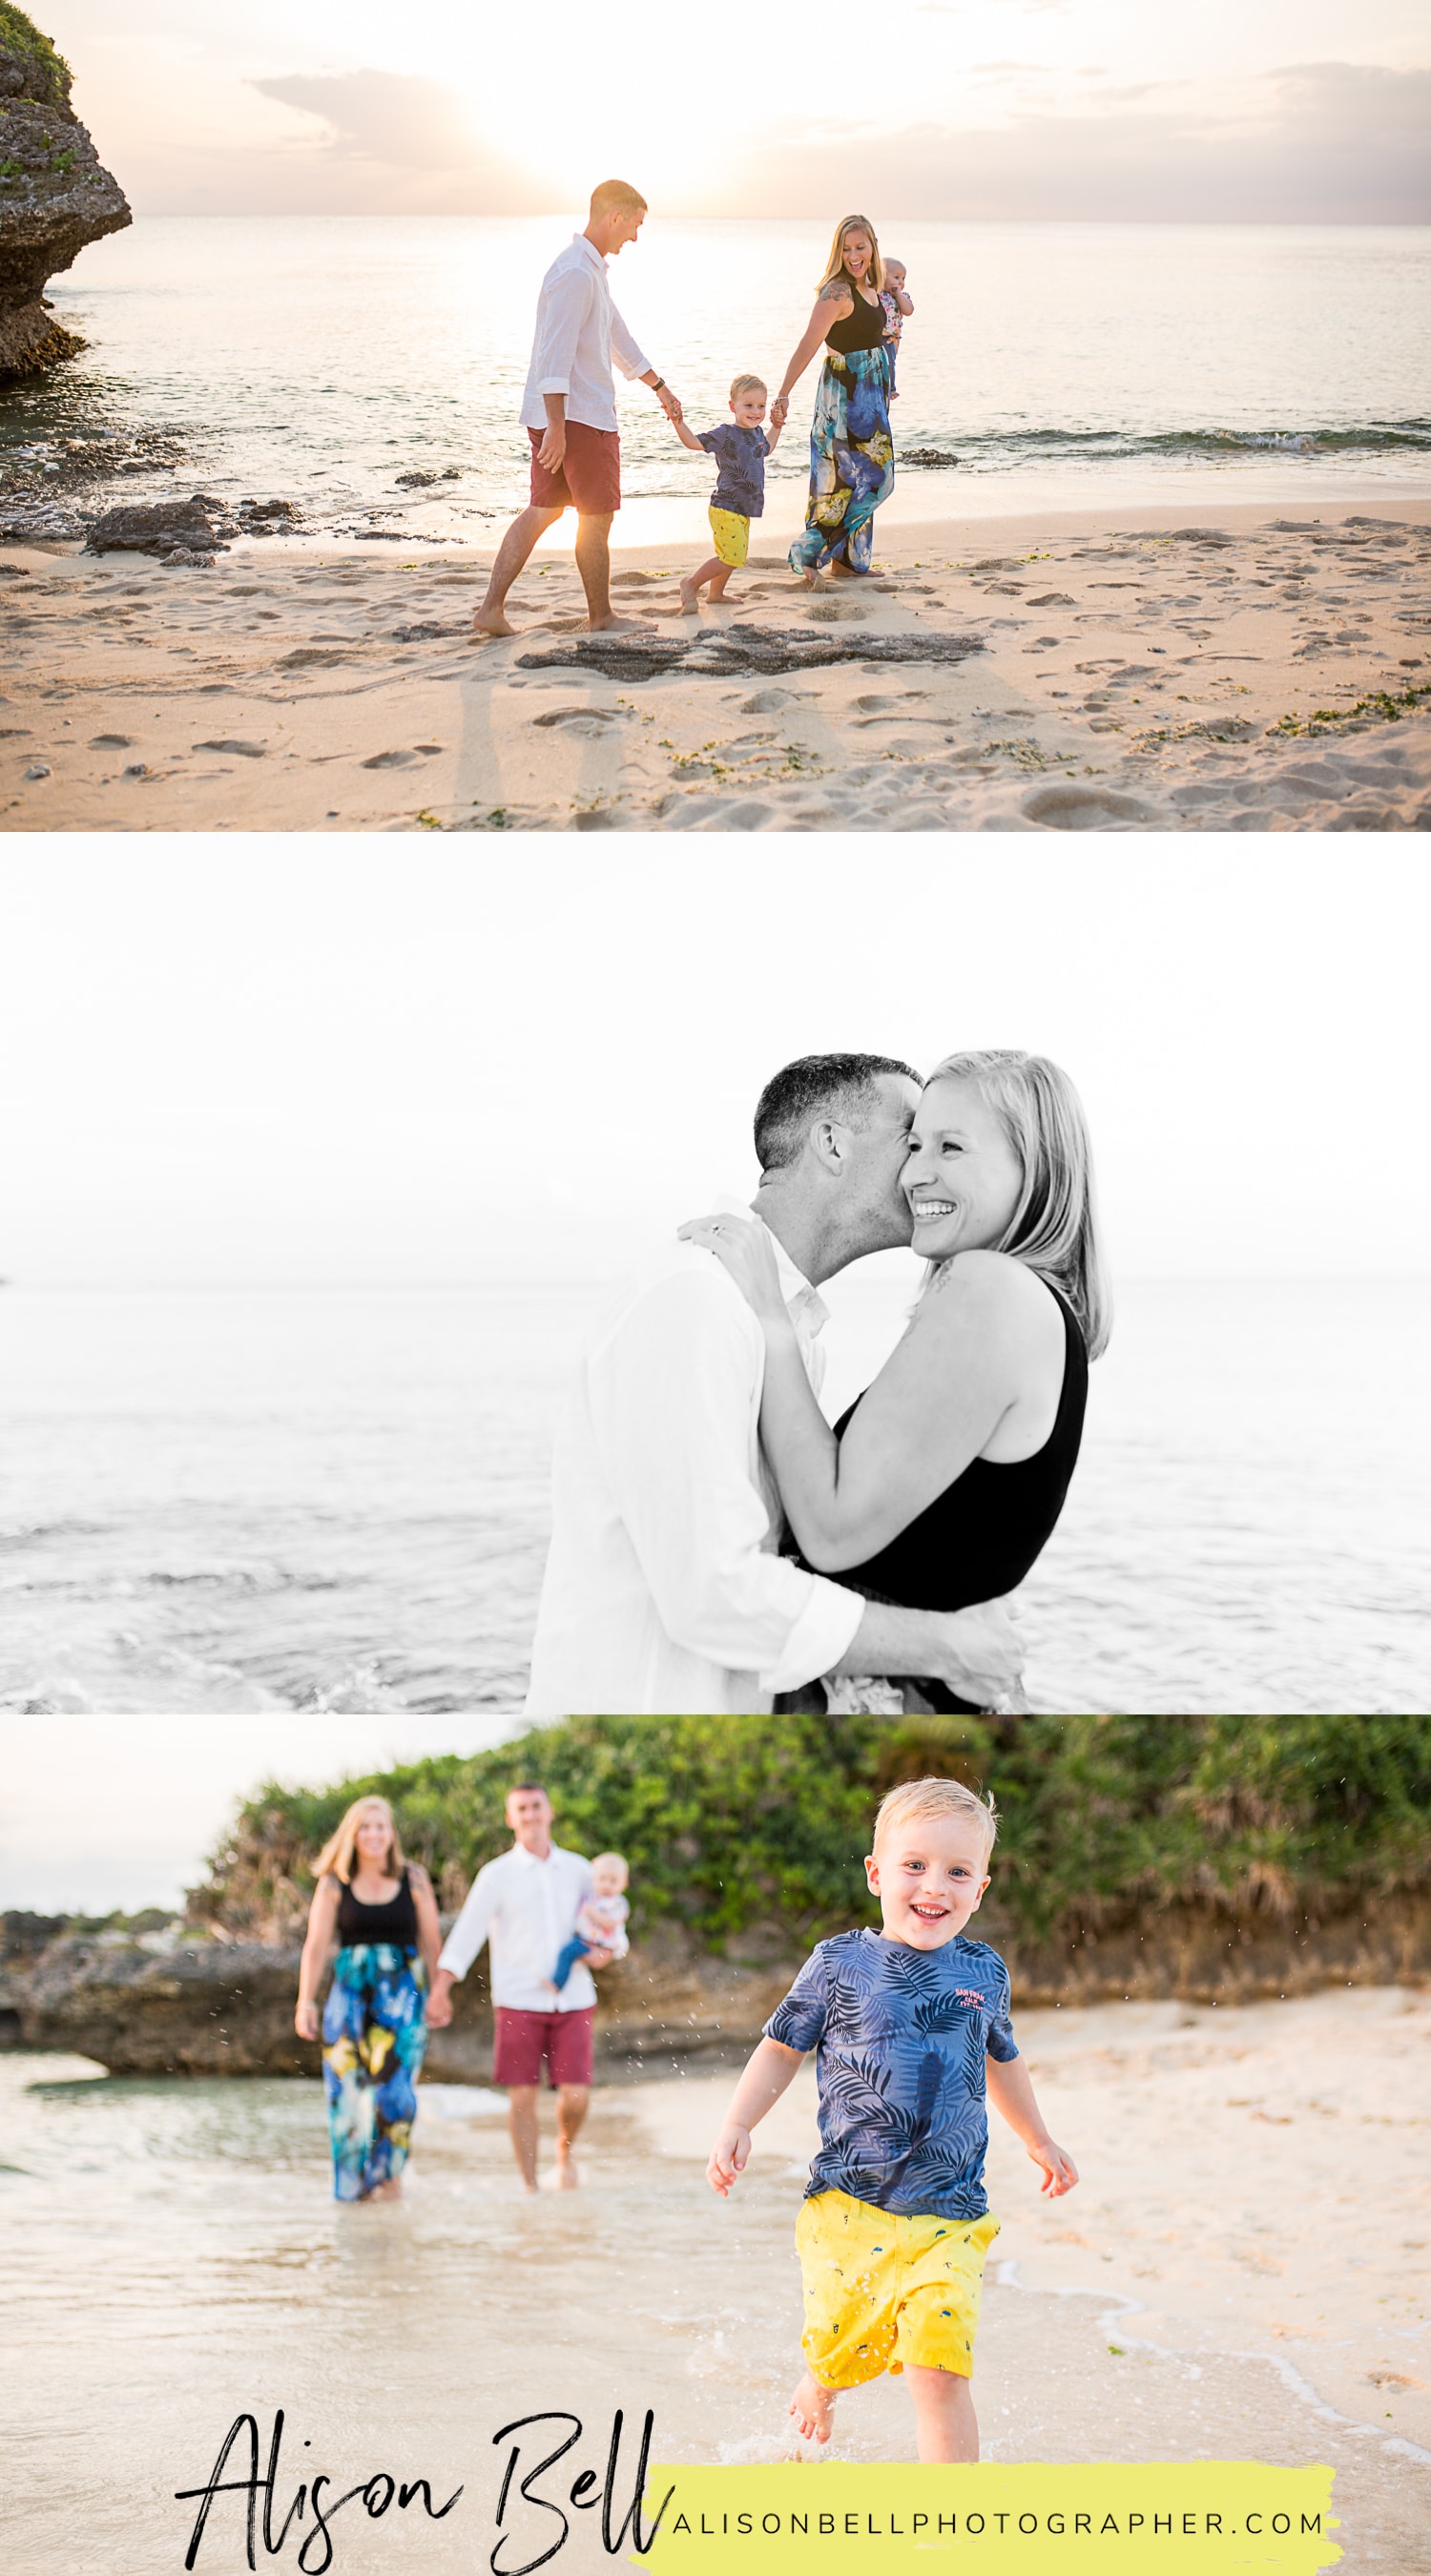 Playful, stress free family photos with Alison Bell, Photographer on the beach in Okinawa, Japan. 